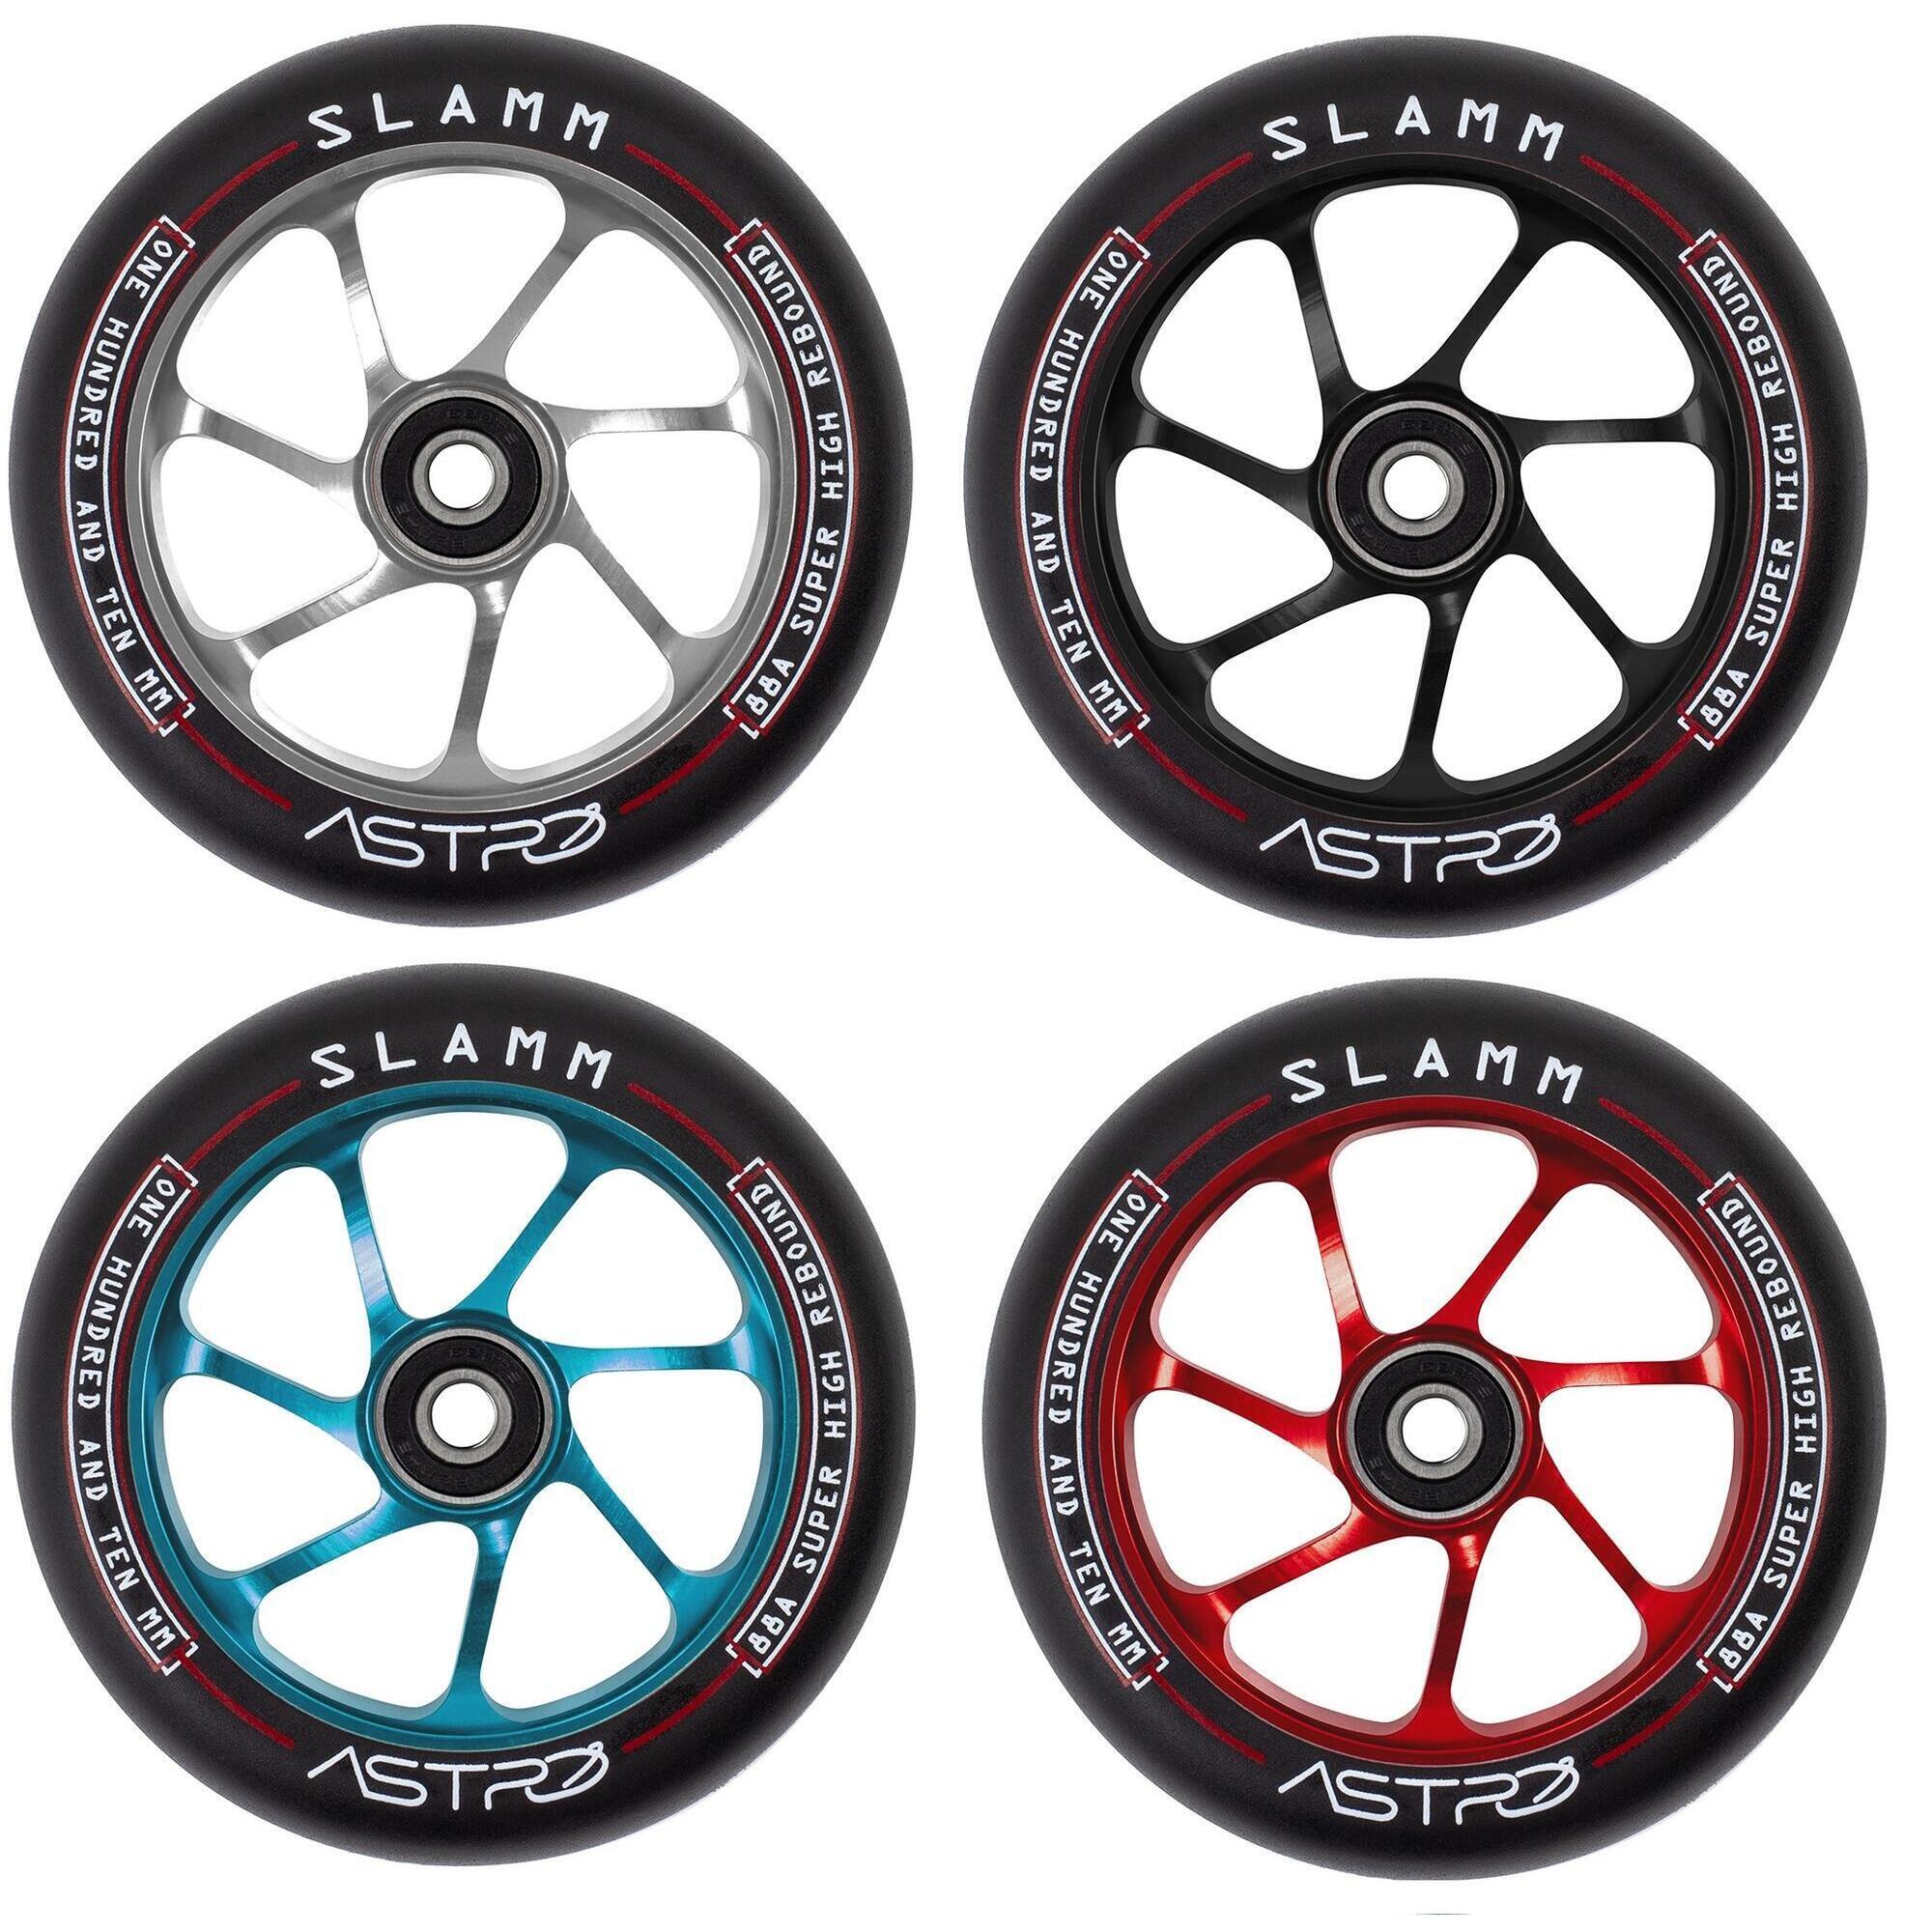 Astro 110mm Alloy Core Scooter Wheel and Bearings 3/3